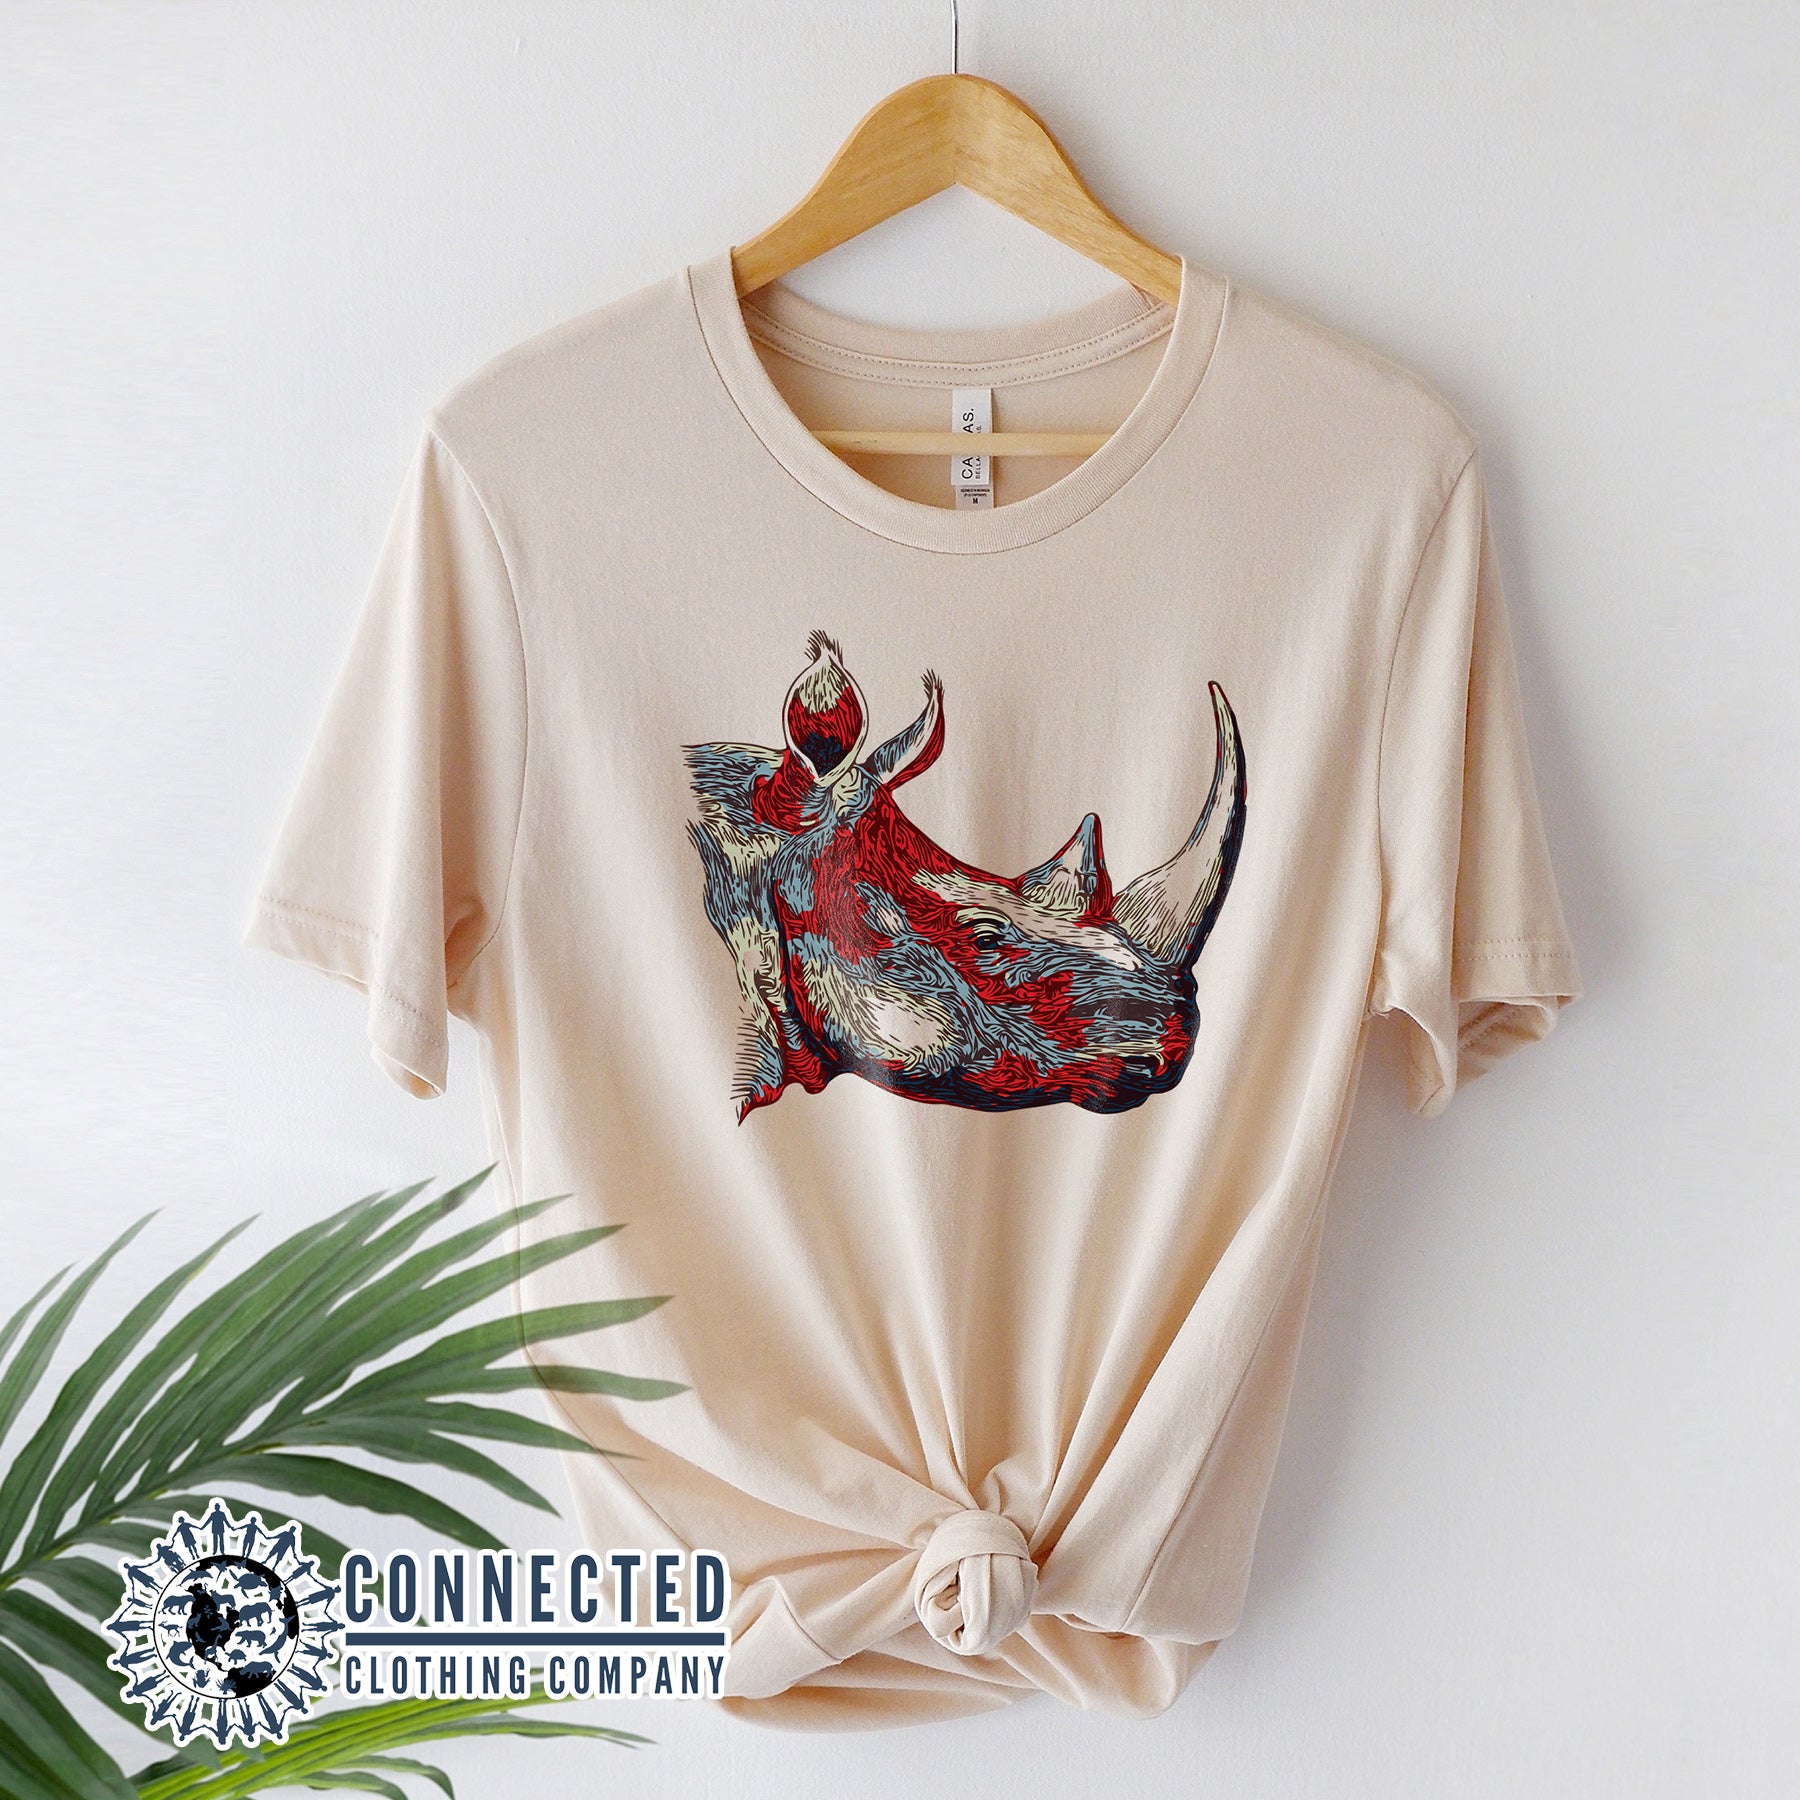 Hanger With Soft Cream Vanishing Into Extinction Rhino Tshirt - sweetsherriloudesigns - Ethically and Sustainable Clothing - 10% of proceeds are donated to rhino conservation